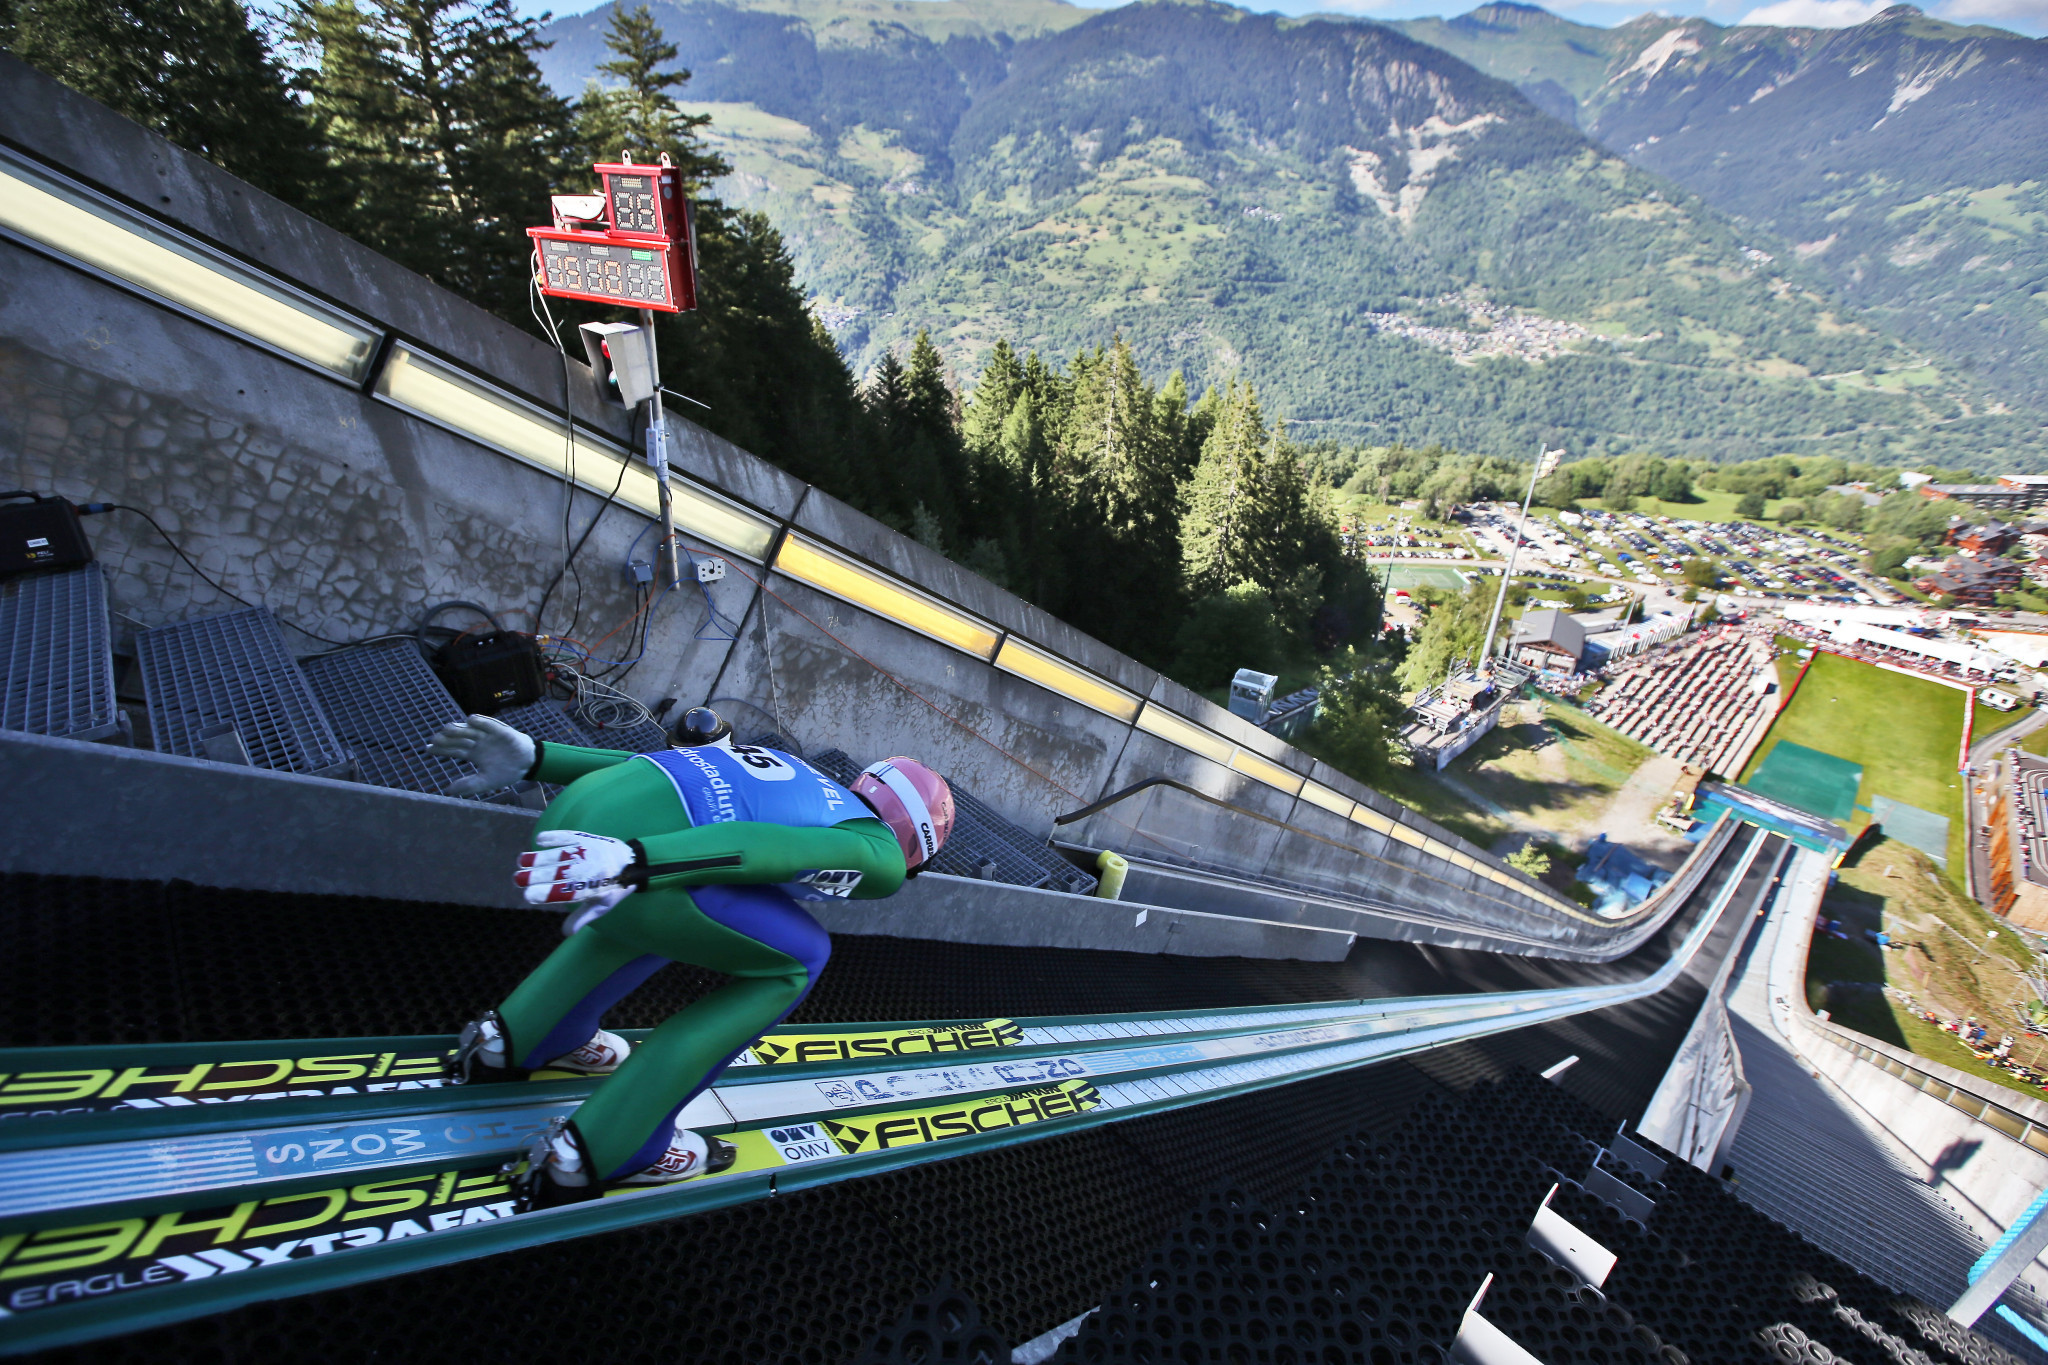 Summer ski jumping events will have a different feel due to the COVID-19 pandemic ©Getty Images